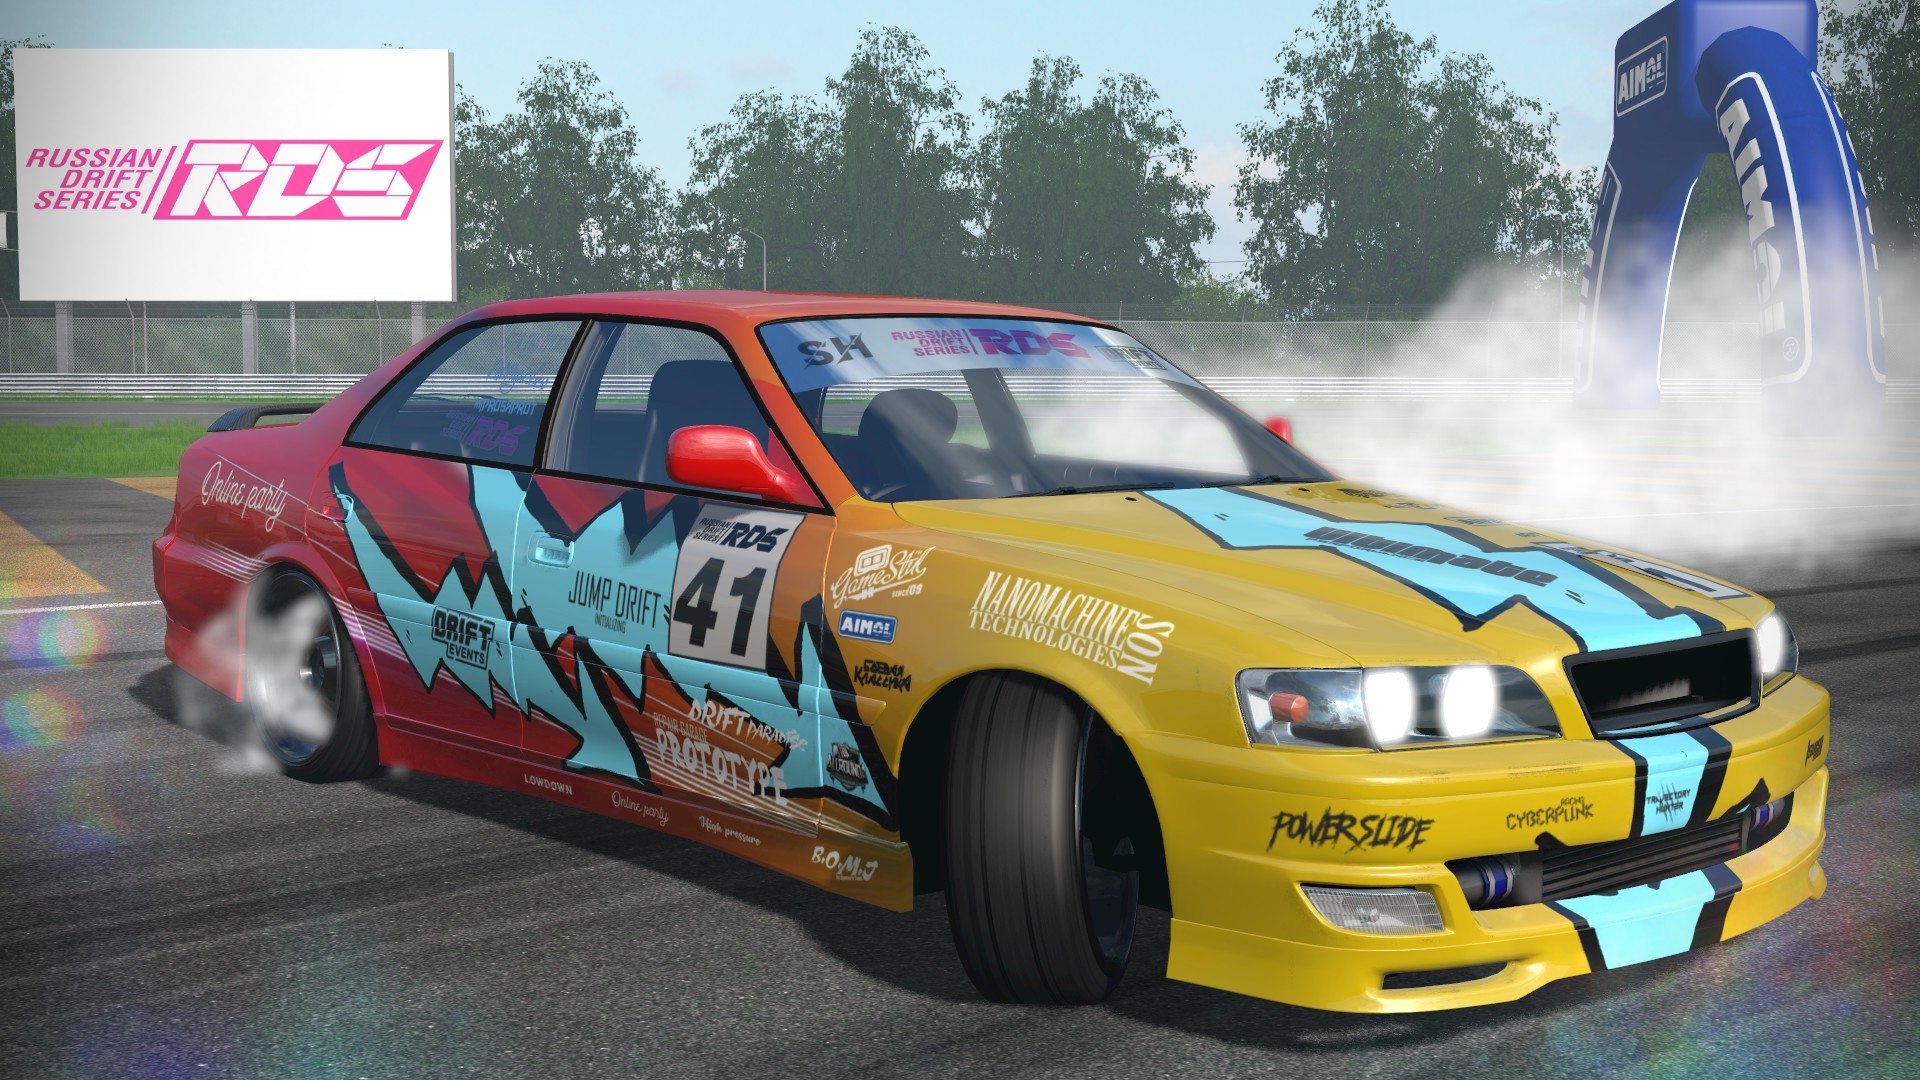 Игры дрифт вазе. RDS дрифт игра. RDS the Official Drift videogame машины. Игра RDS 2. RDS — the Official Drift videogame (2019).